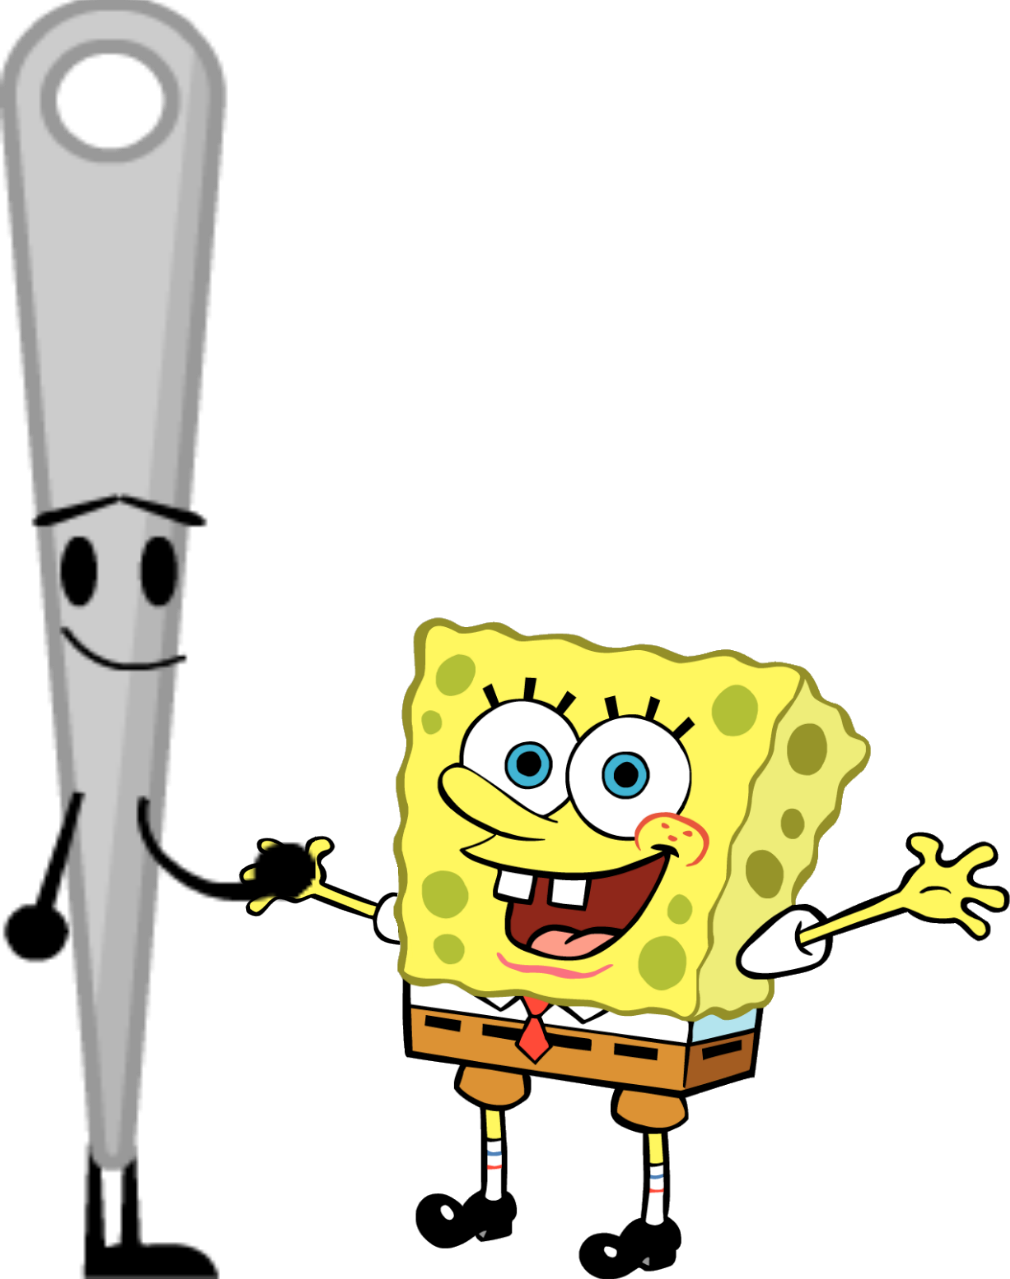 And Spongebob Needle Cupcake Animation Party The PNG Image